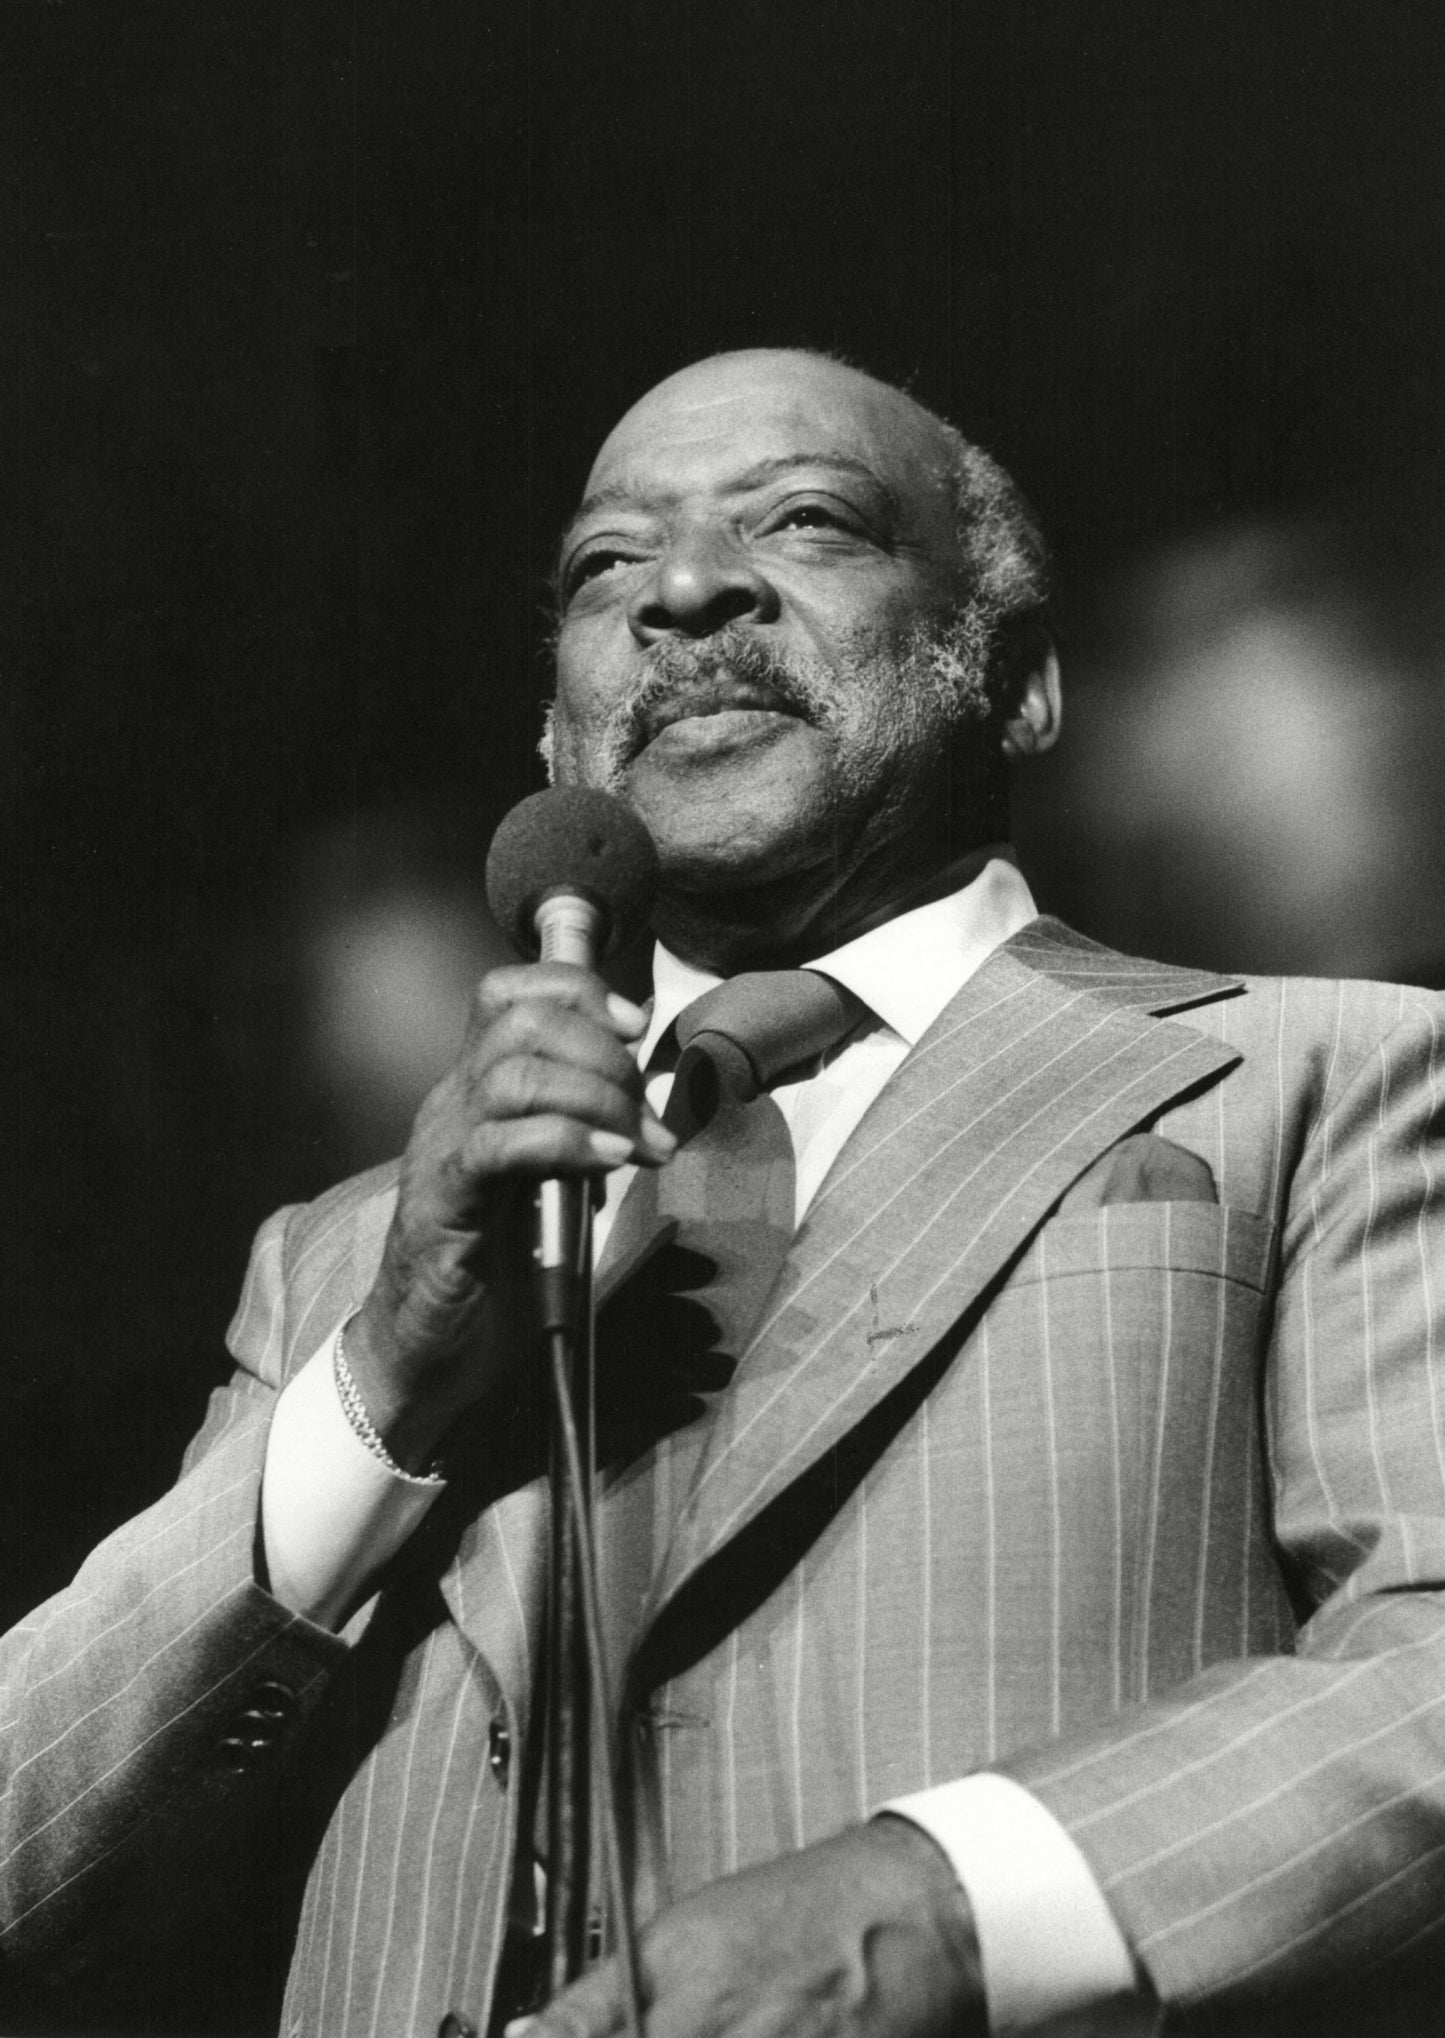 Count Basie - At the Microphone On Stage, England, 1978 Print